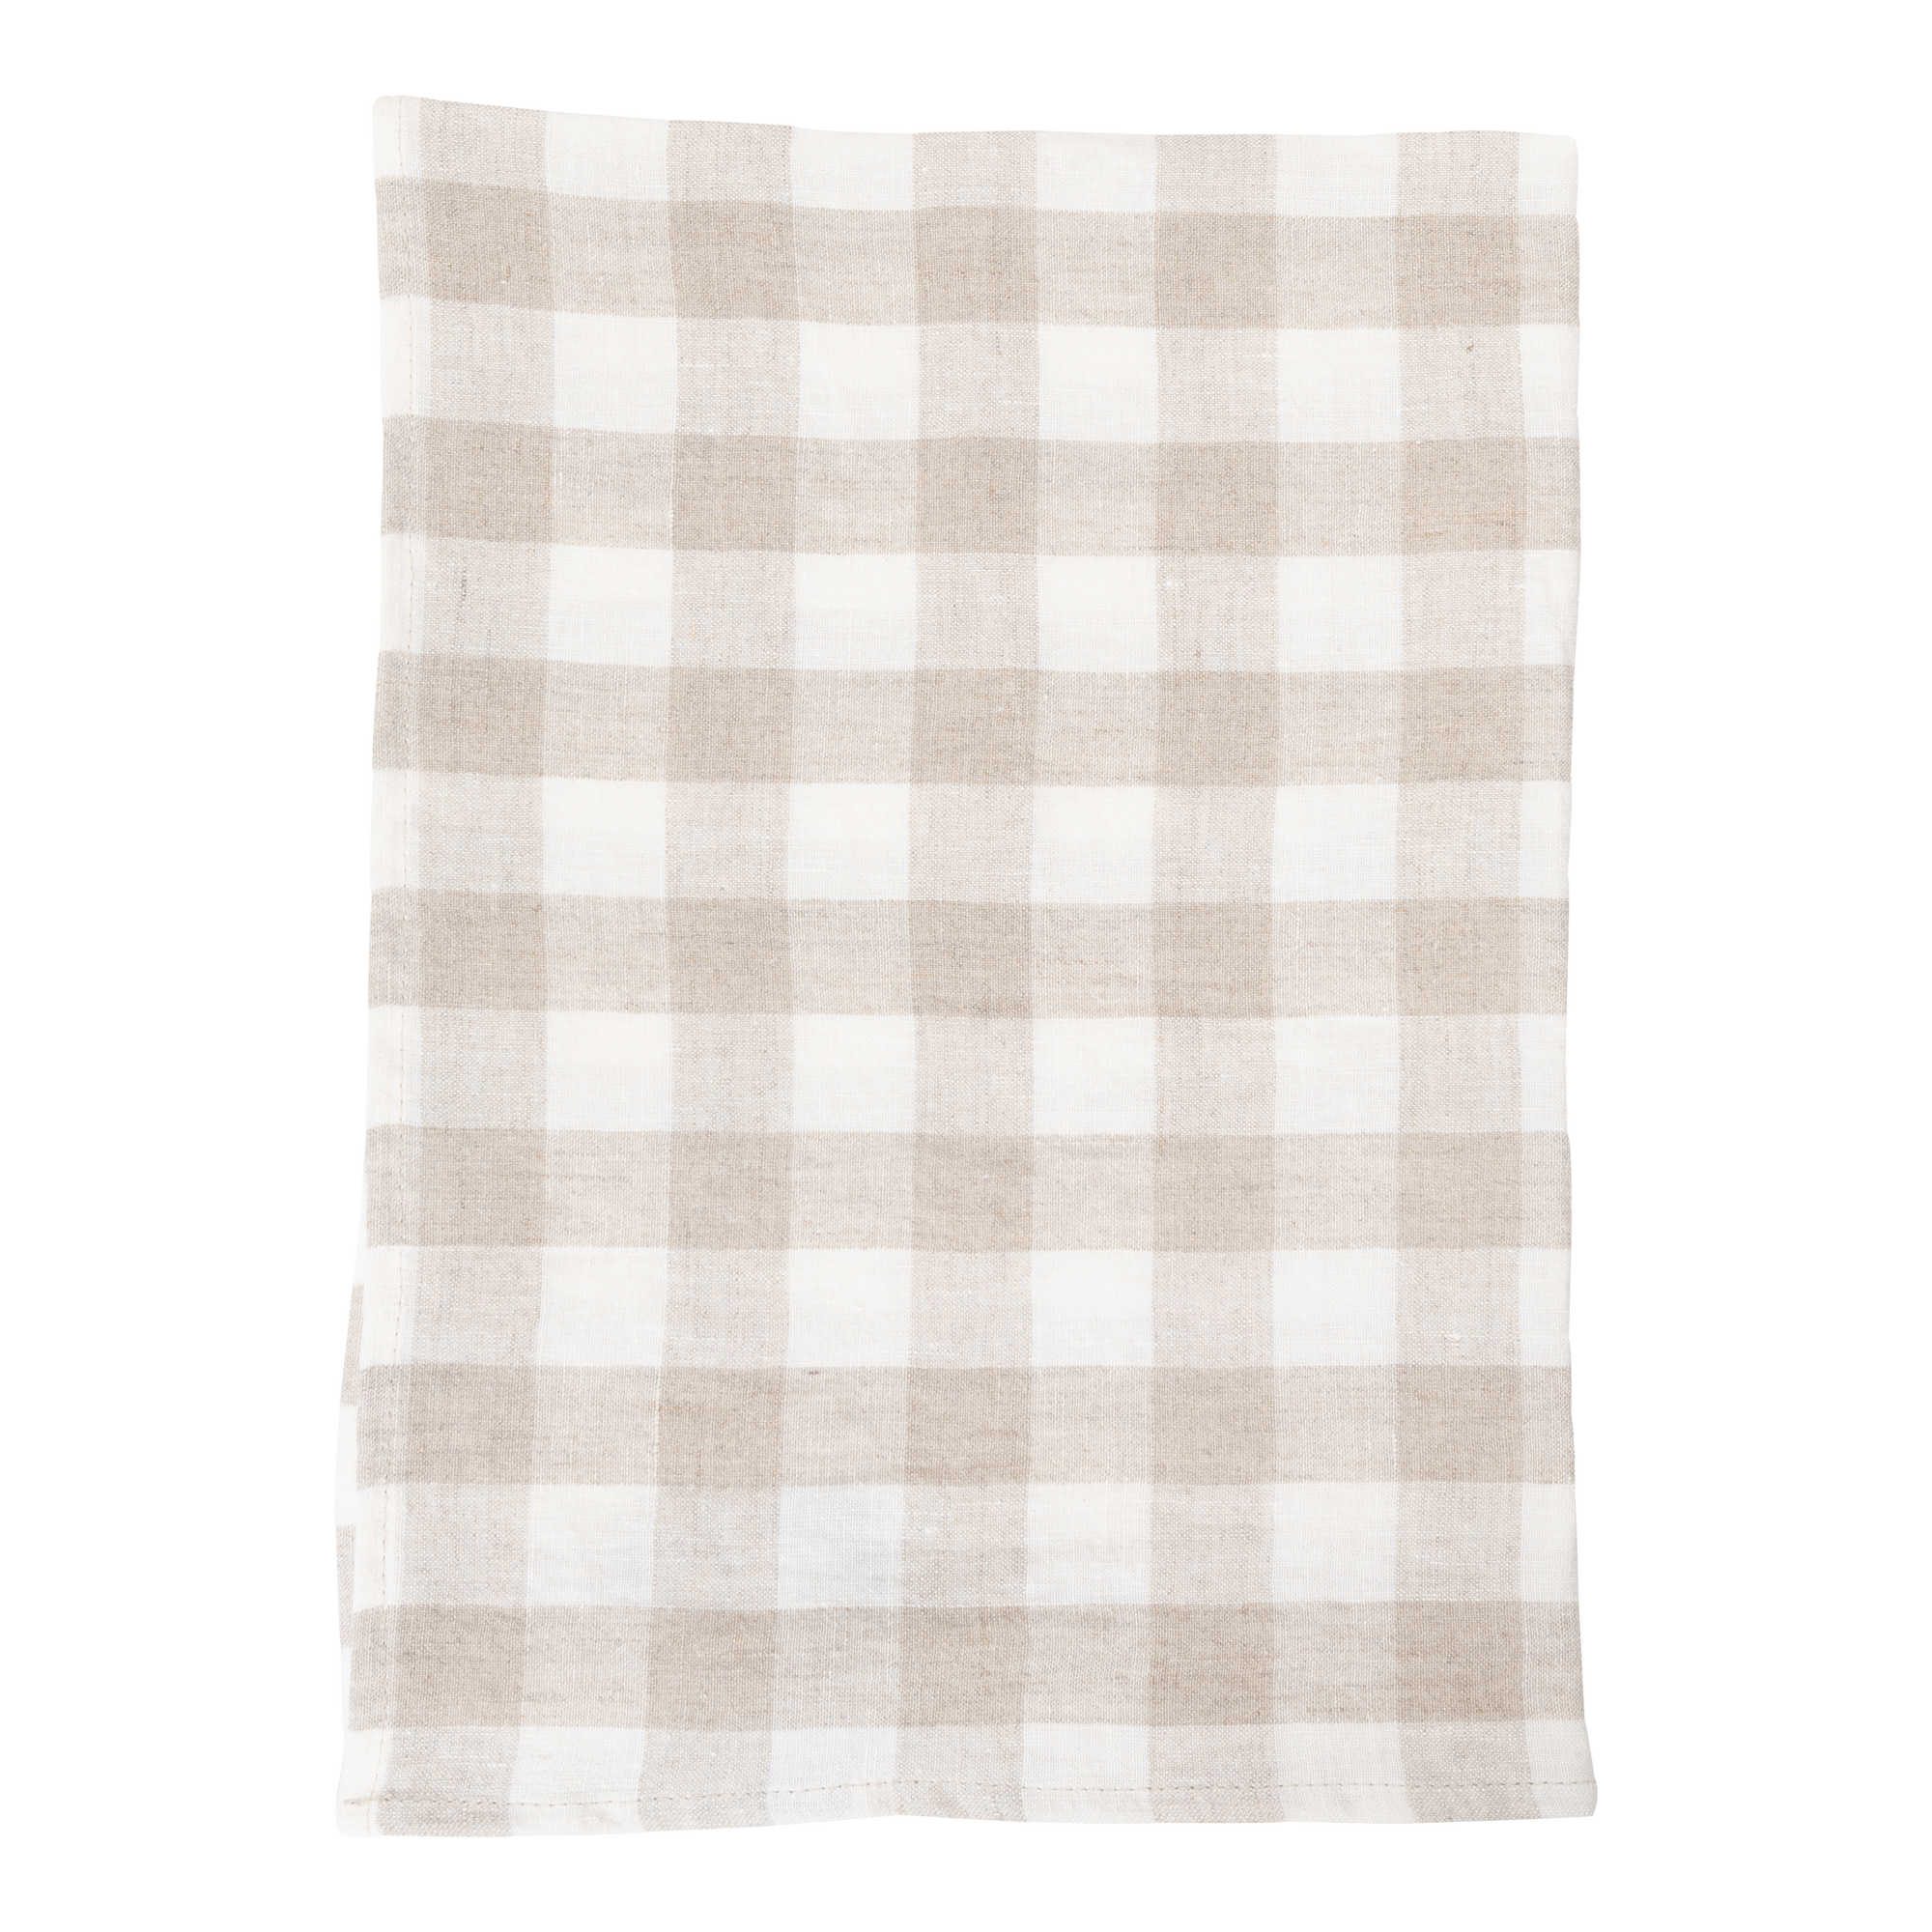 Made from 100% linen, the Linen Check Tea Towel features a generously soft texture and checkered pattern.